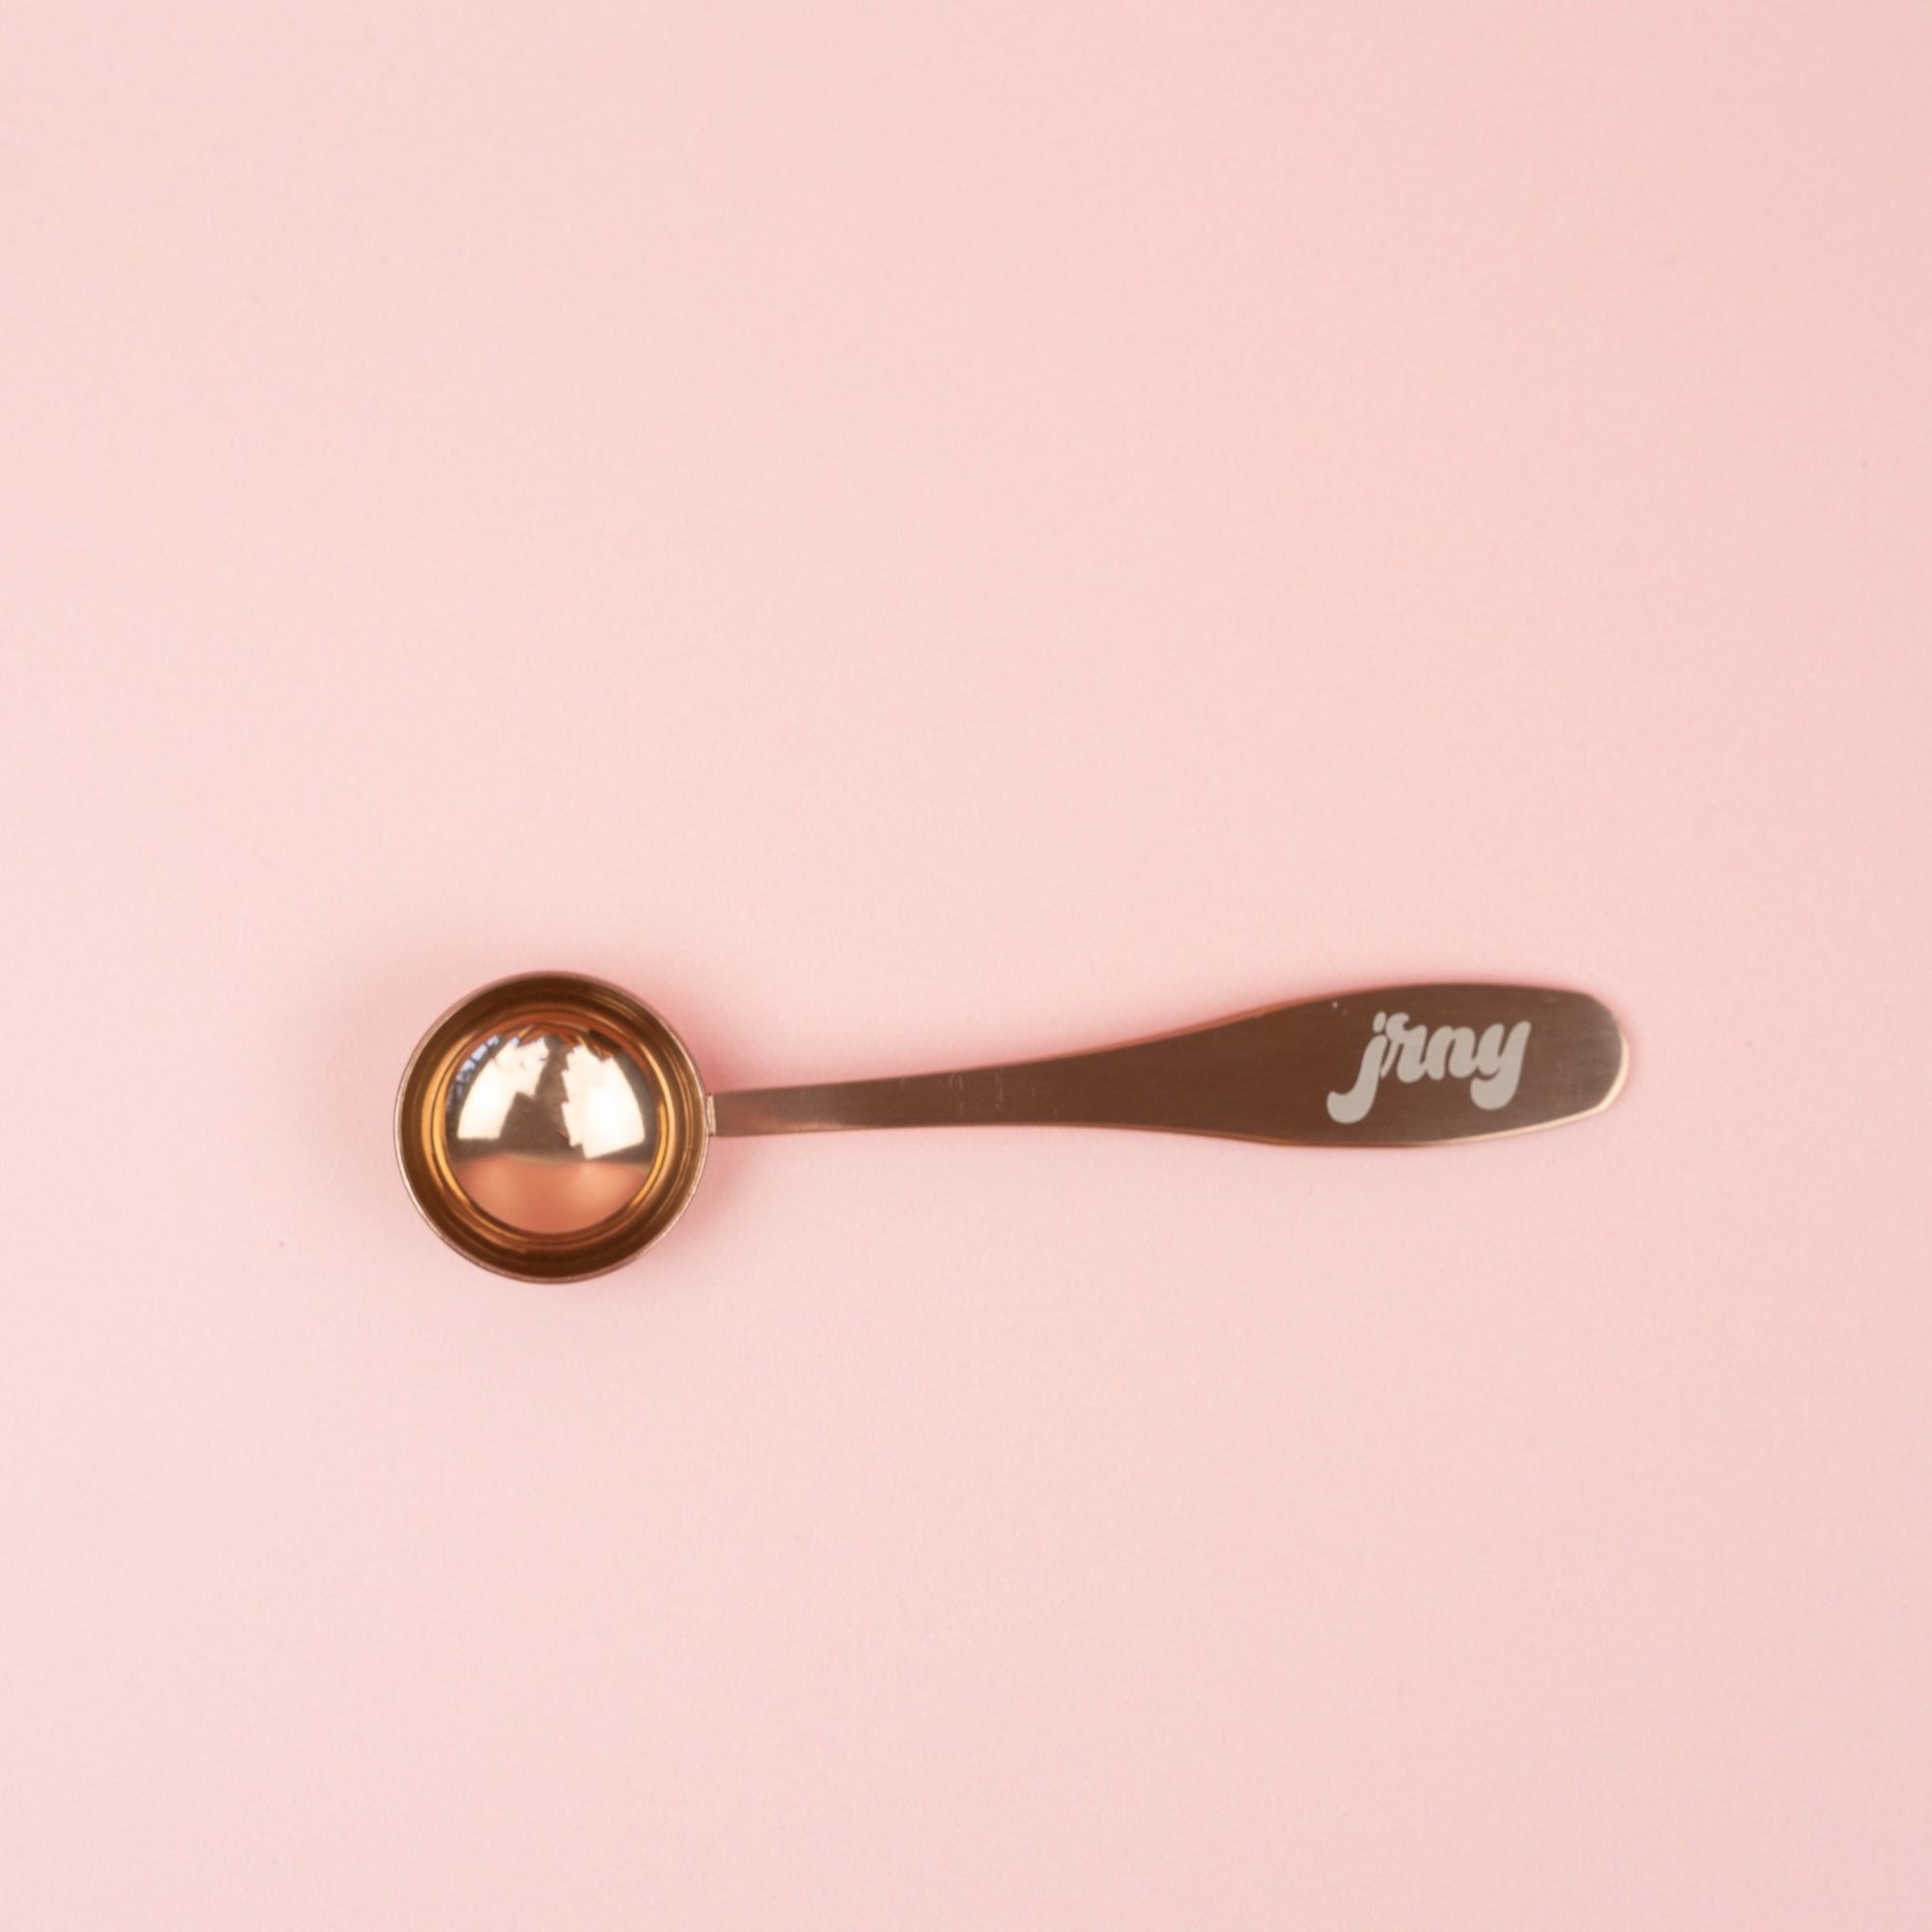 Copper Stainless Steel Scoop - jrny